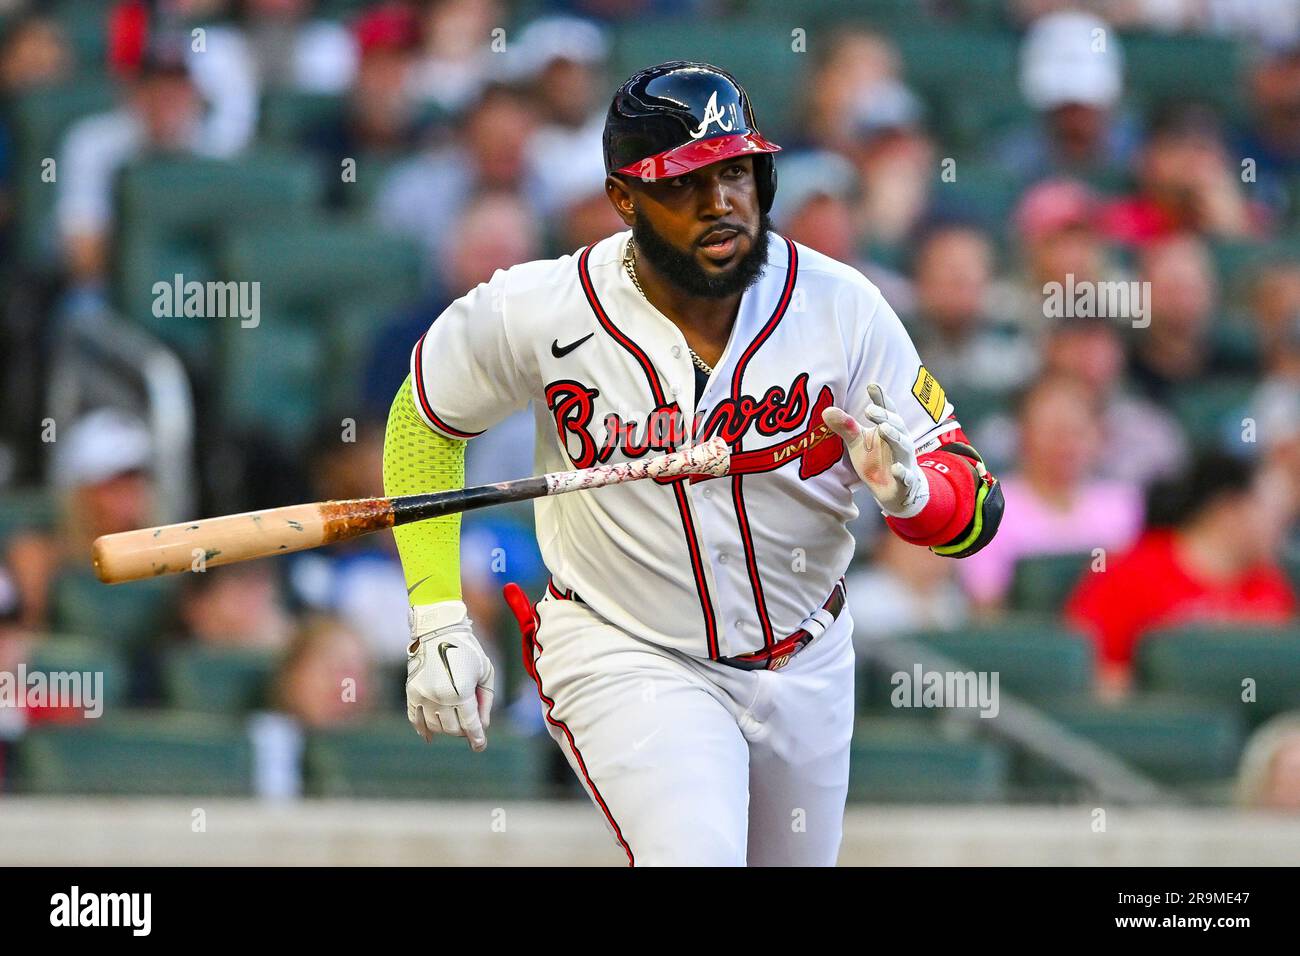 ATLANTA, GA – JUNE 27: Atlanta designated hitter Marcell Ozuna (20) runs to  first after hitting a single during the MLB game between the Minnesota  Twins and the Atlanta Braves on June